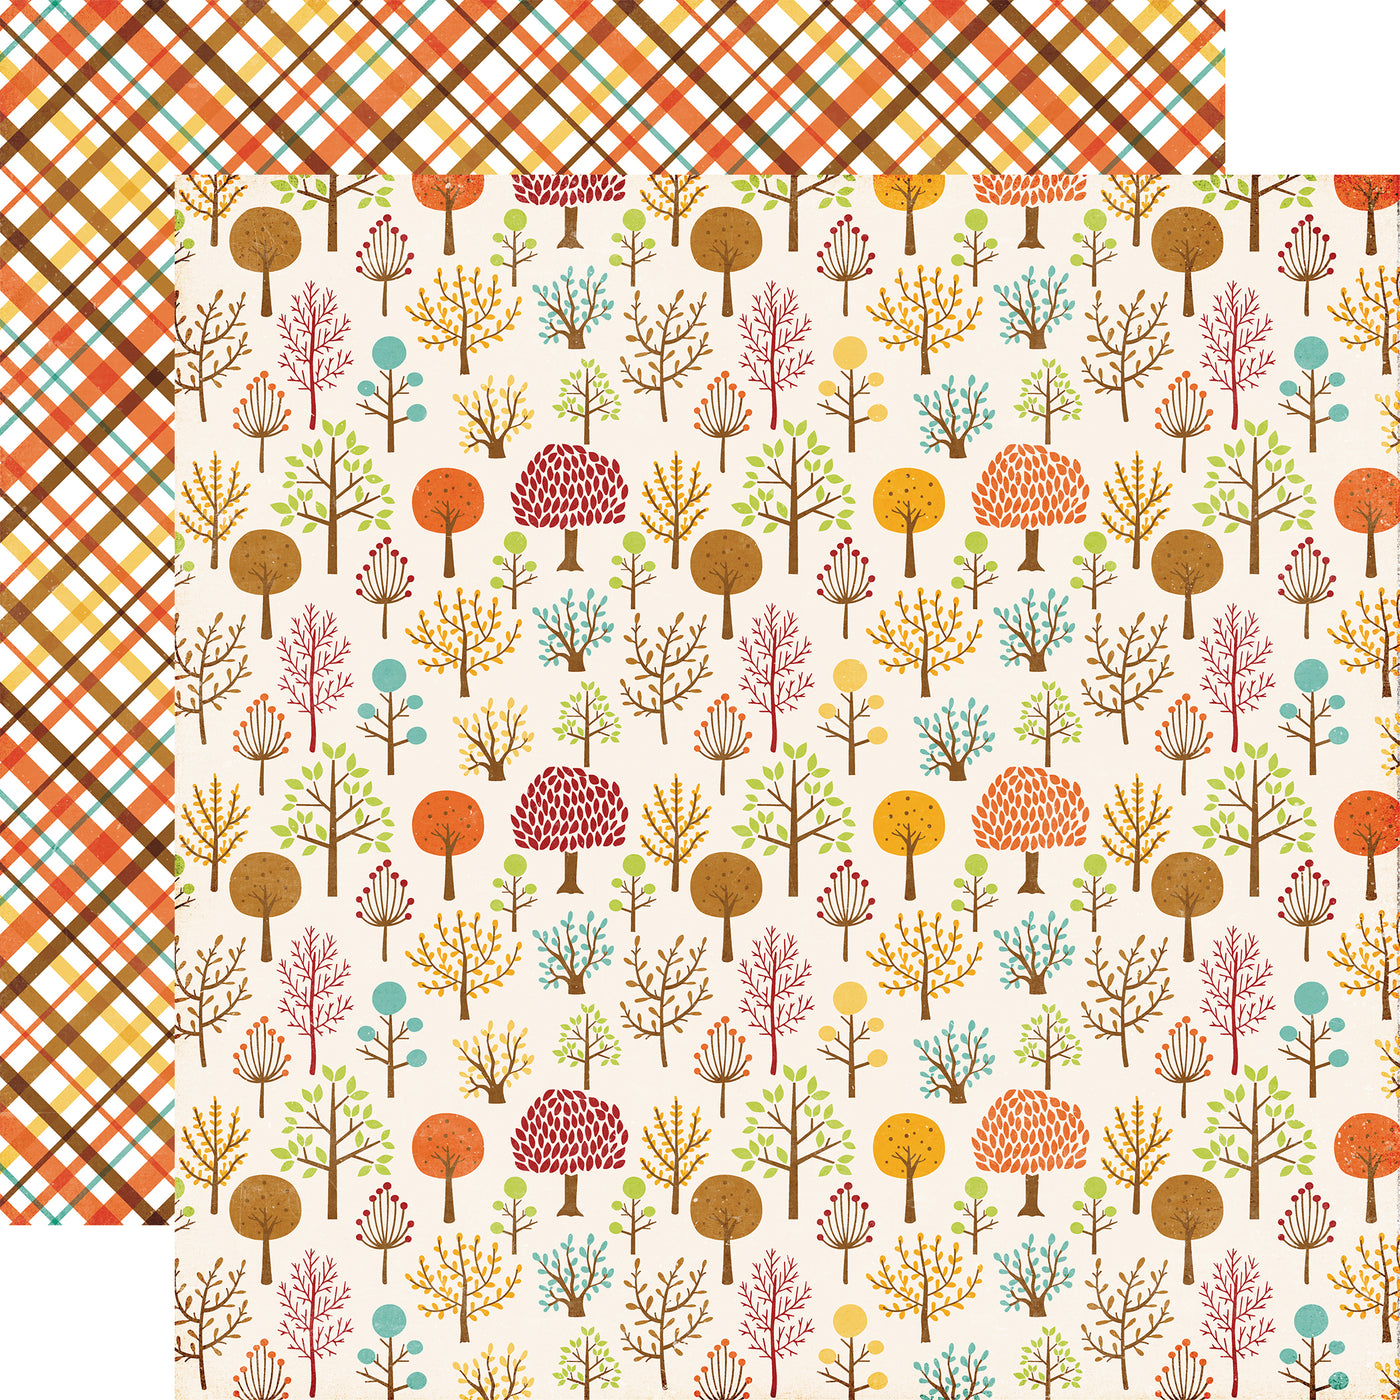 Multi-Colored (Side A - rows of trees in fall colors on a cream background, Side B - orange fall plaid)